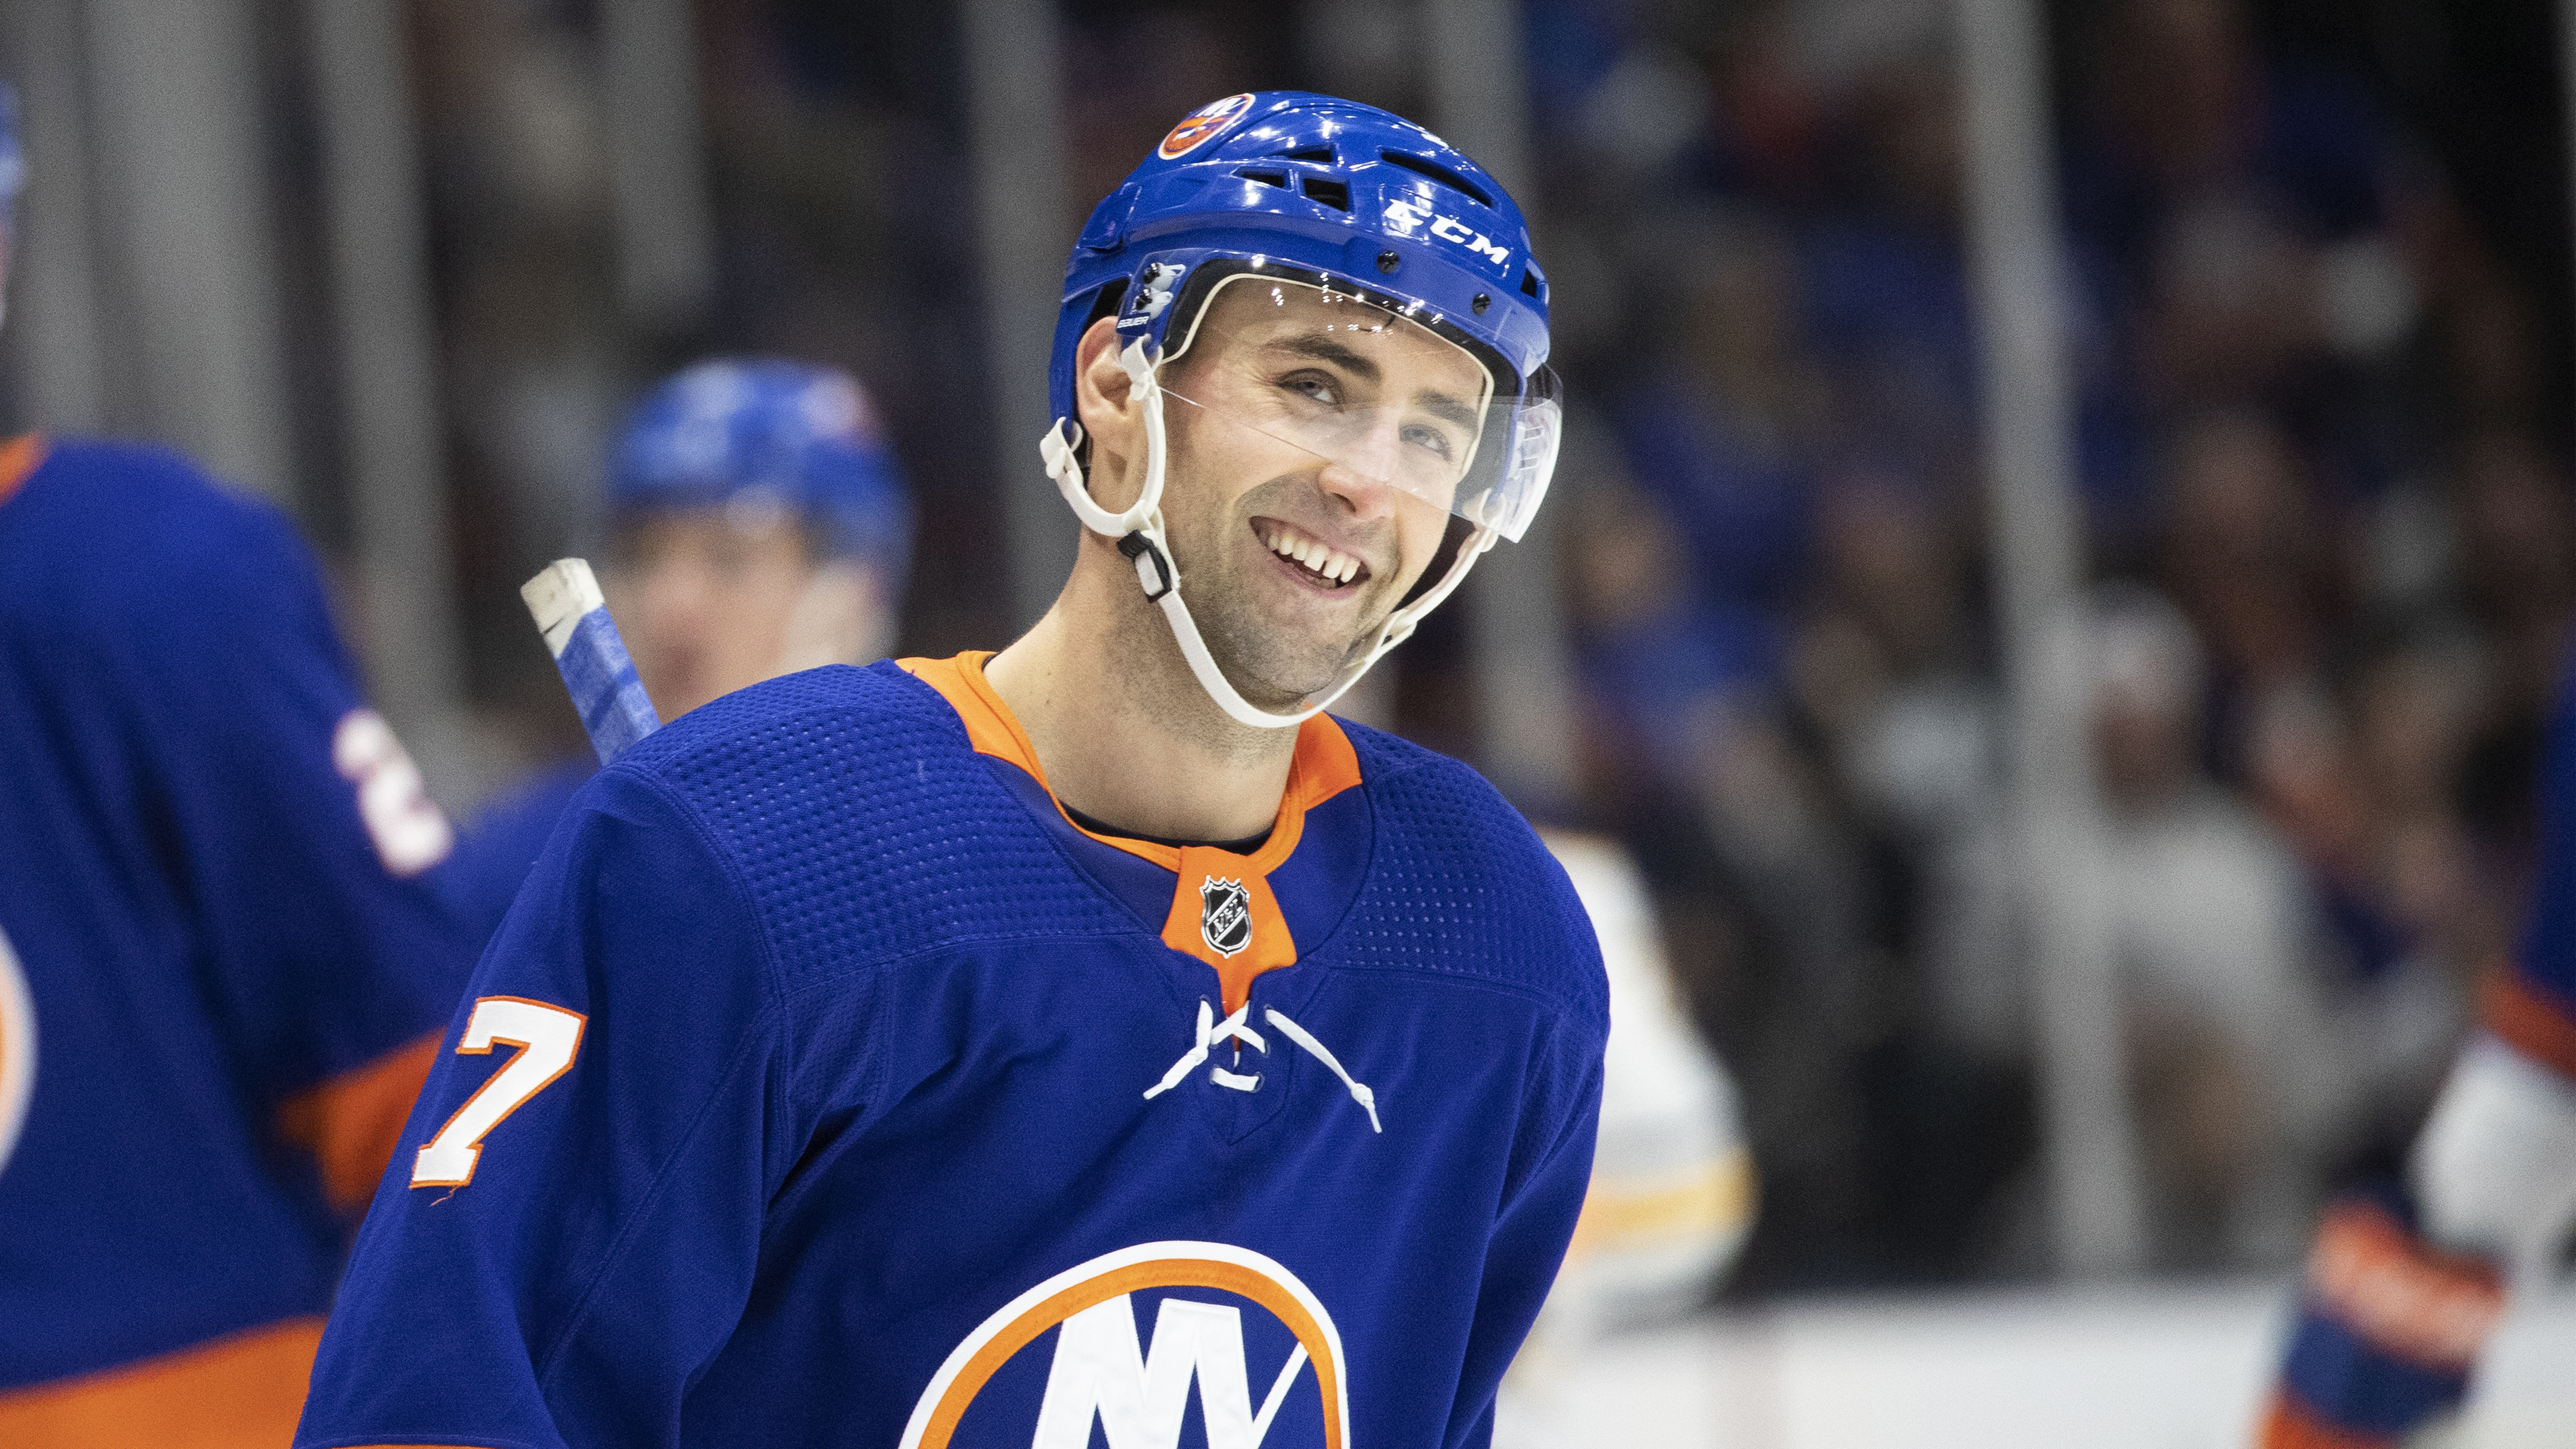 Jordan Eberle of the New York Islanders poses for his official